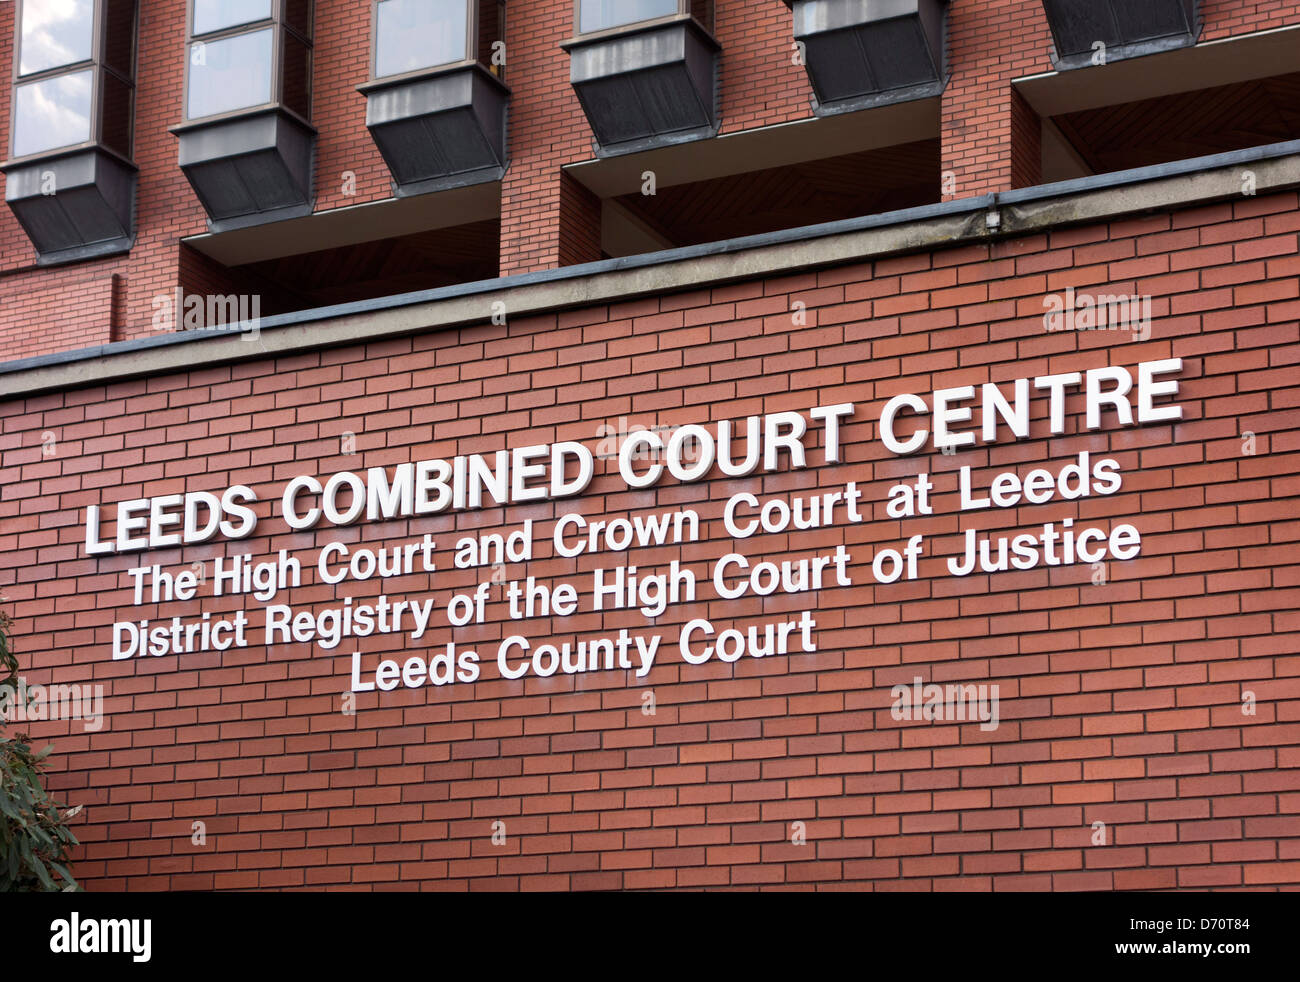 The Leeds Combined Court Centre (High Court, Crown Court, High Court of Justice, and County Court), Leeds, West Yorkshire, UK Stock Photo